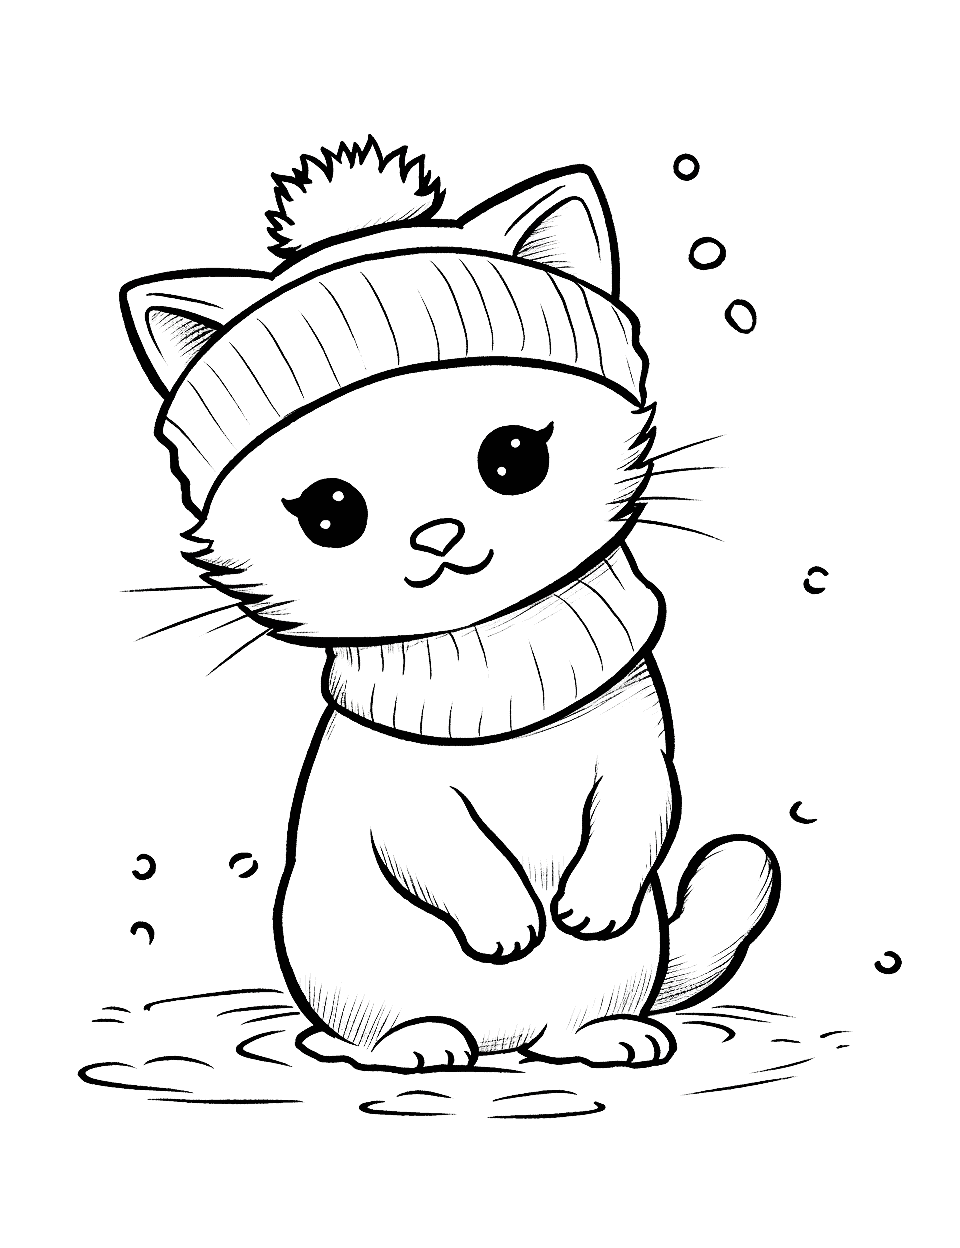 Cute Kitten Playing in the Snow Cat Coloring Page - A kawaii kitten wearing a hat having fun on a snowy day.